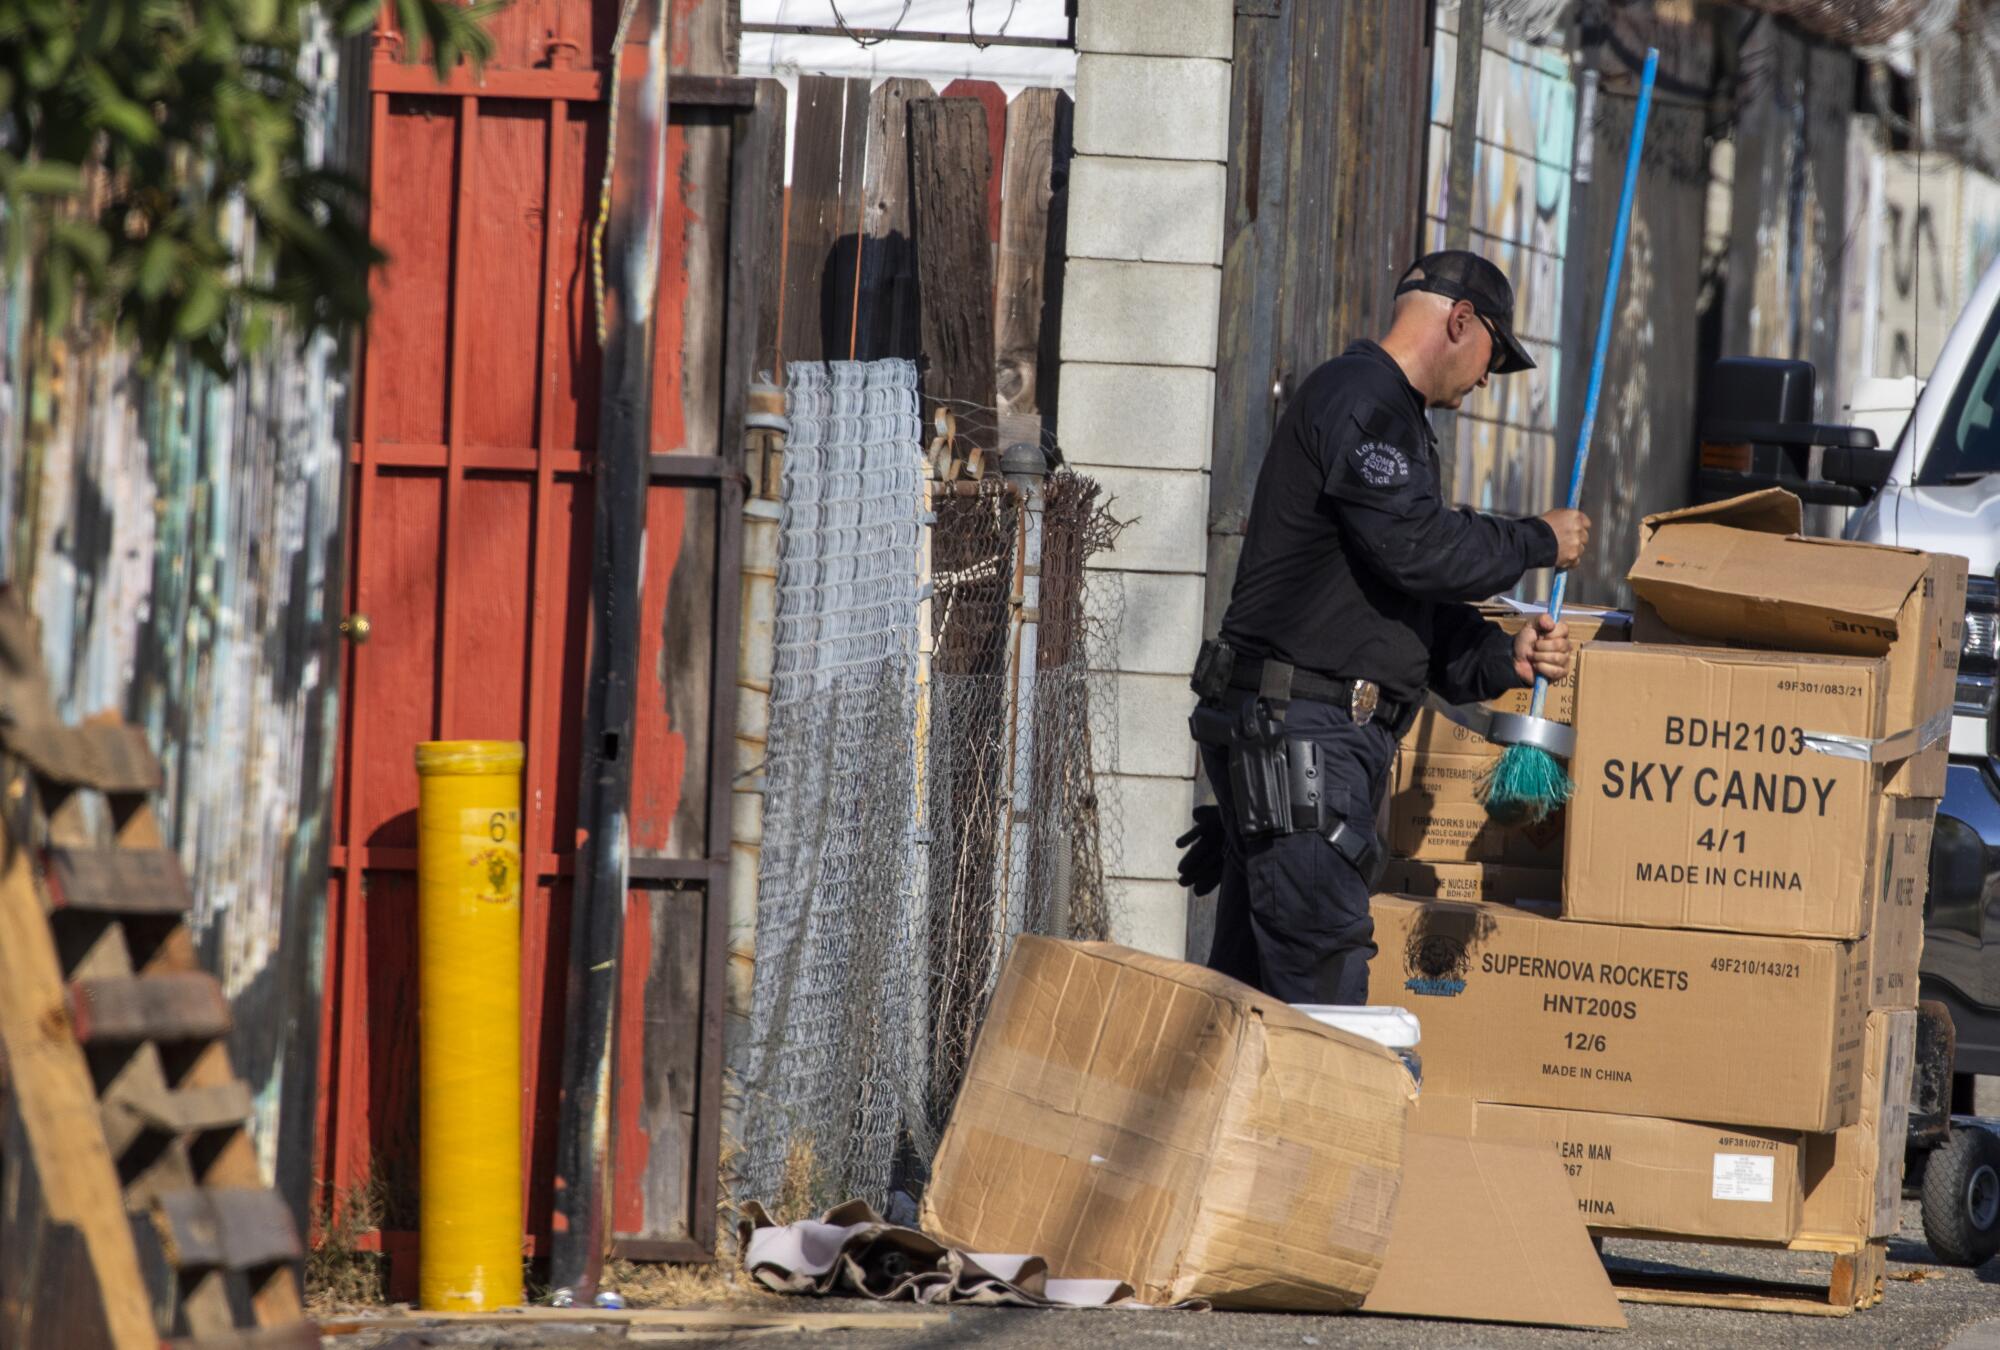 An officer stands next to cardboard boxes.